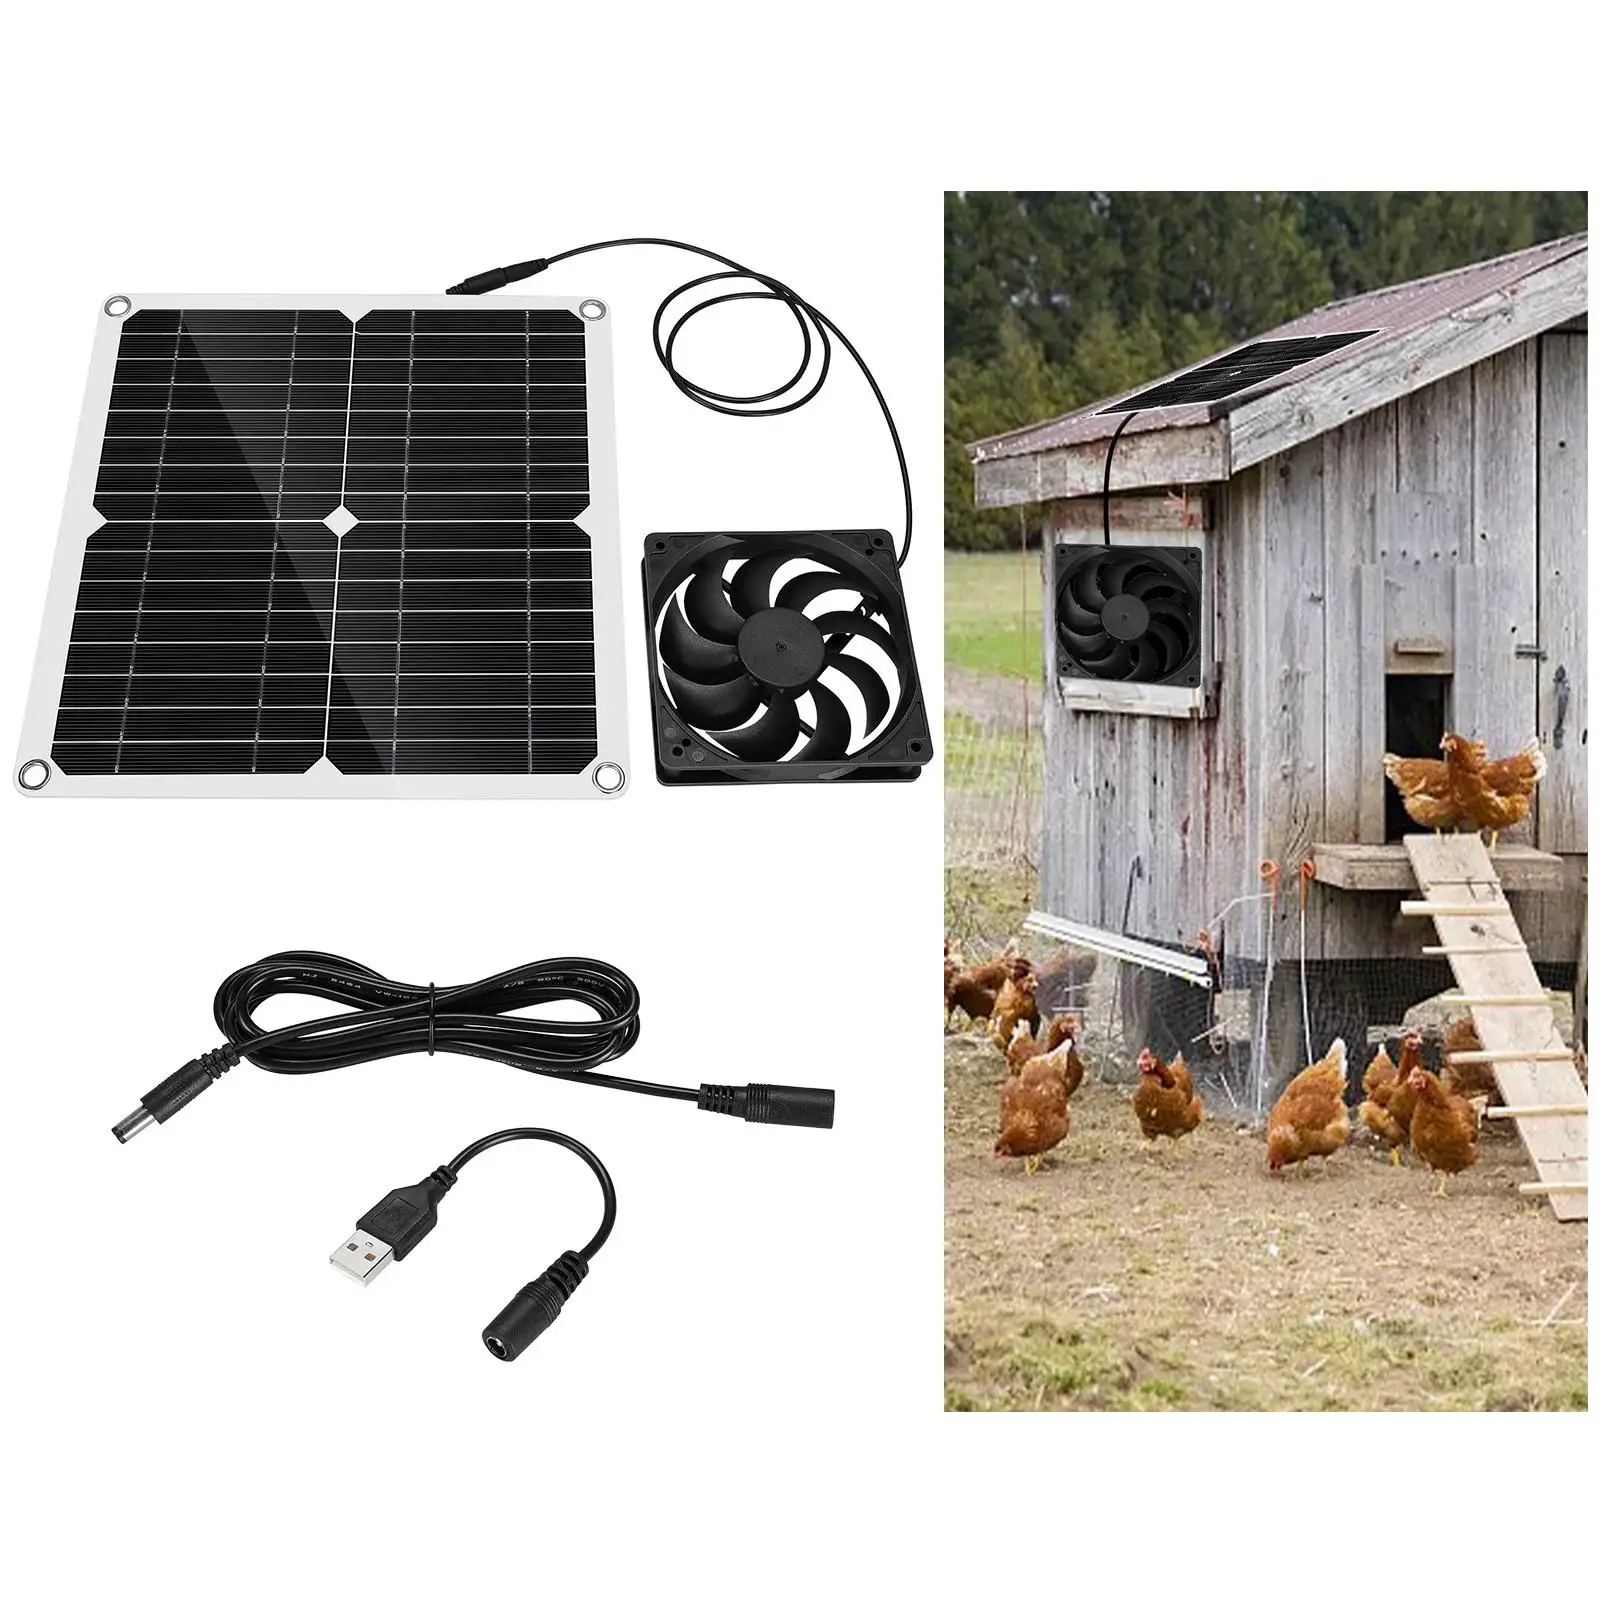 12W Solar Exhaust Fan Outdoor Cooling 12V Ventilation Portable Mini Ventilator for Greenhouse Chicken House Home Camping Rvs